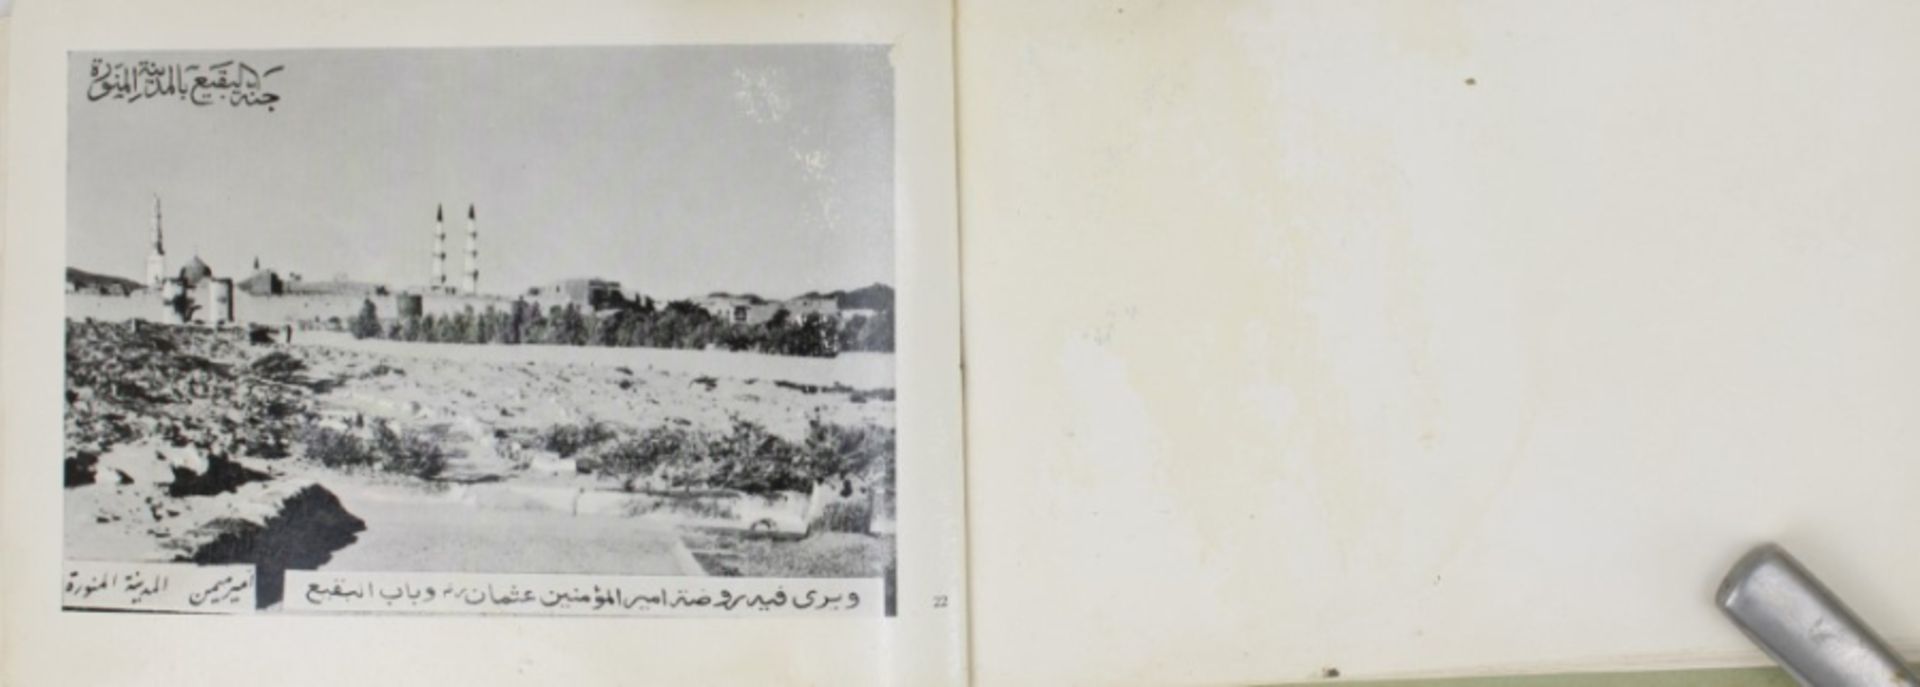 1930 Album with photographs of Mecca - Image 21 of 24